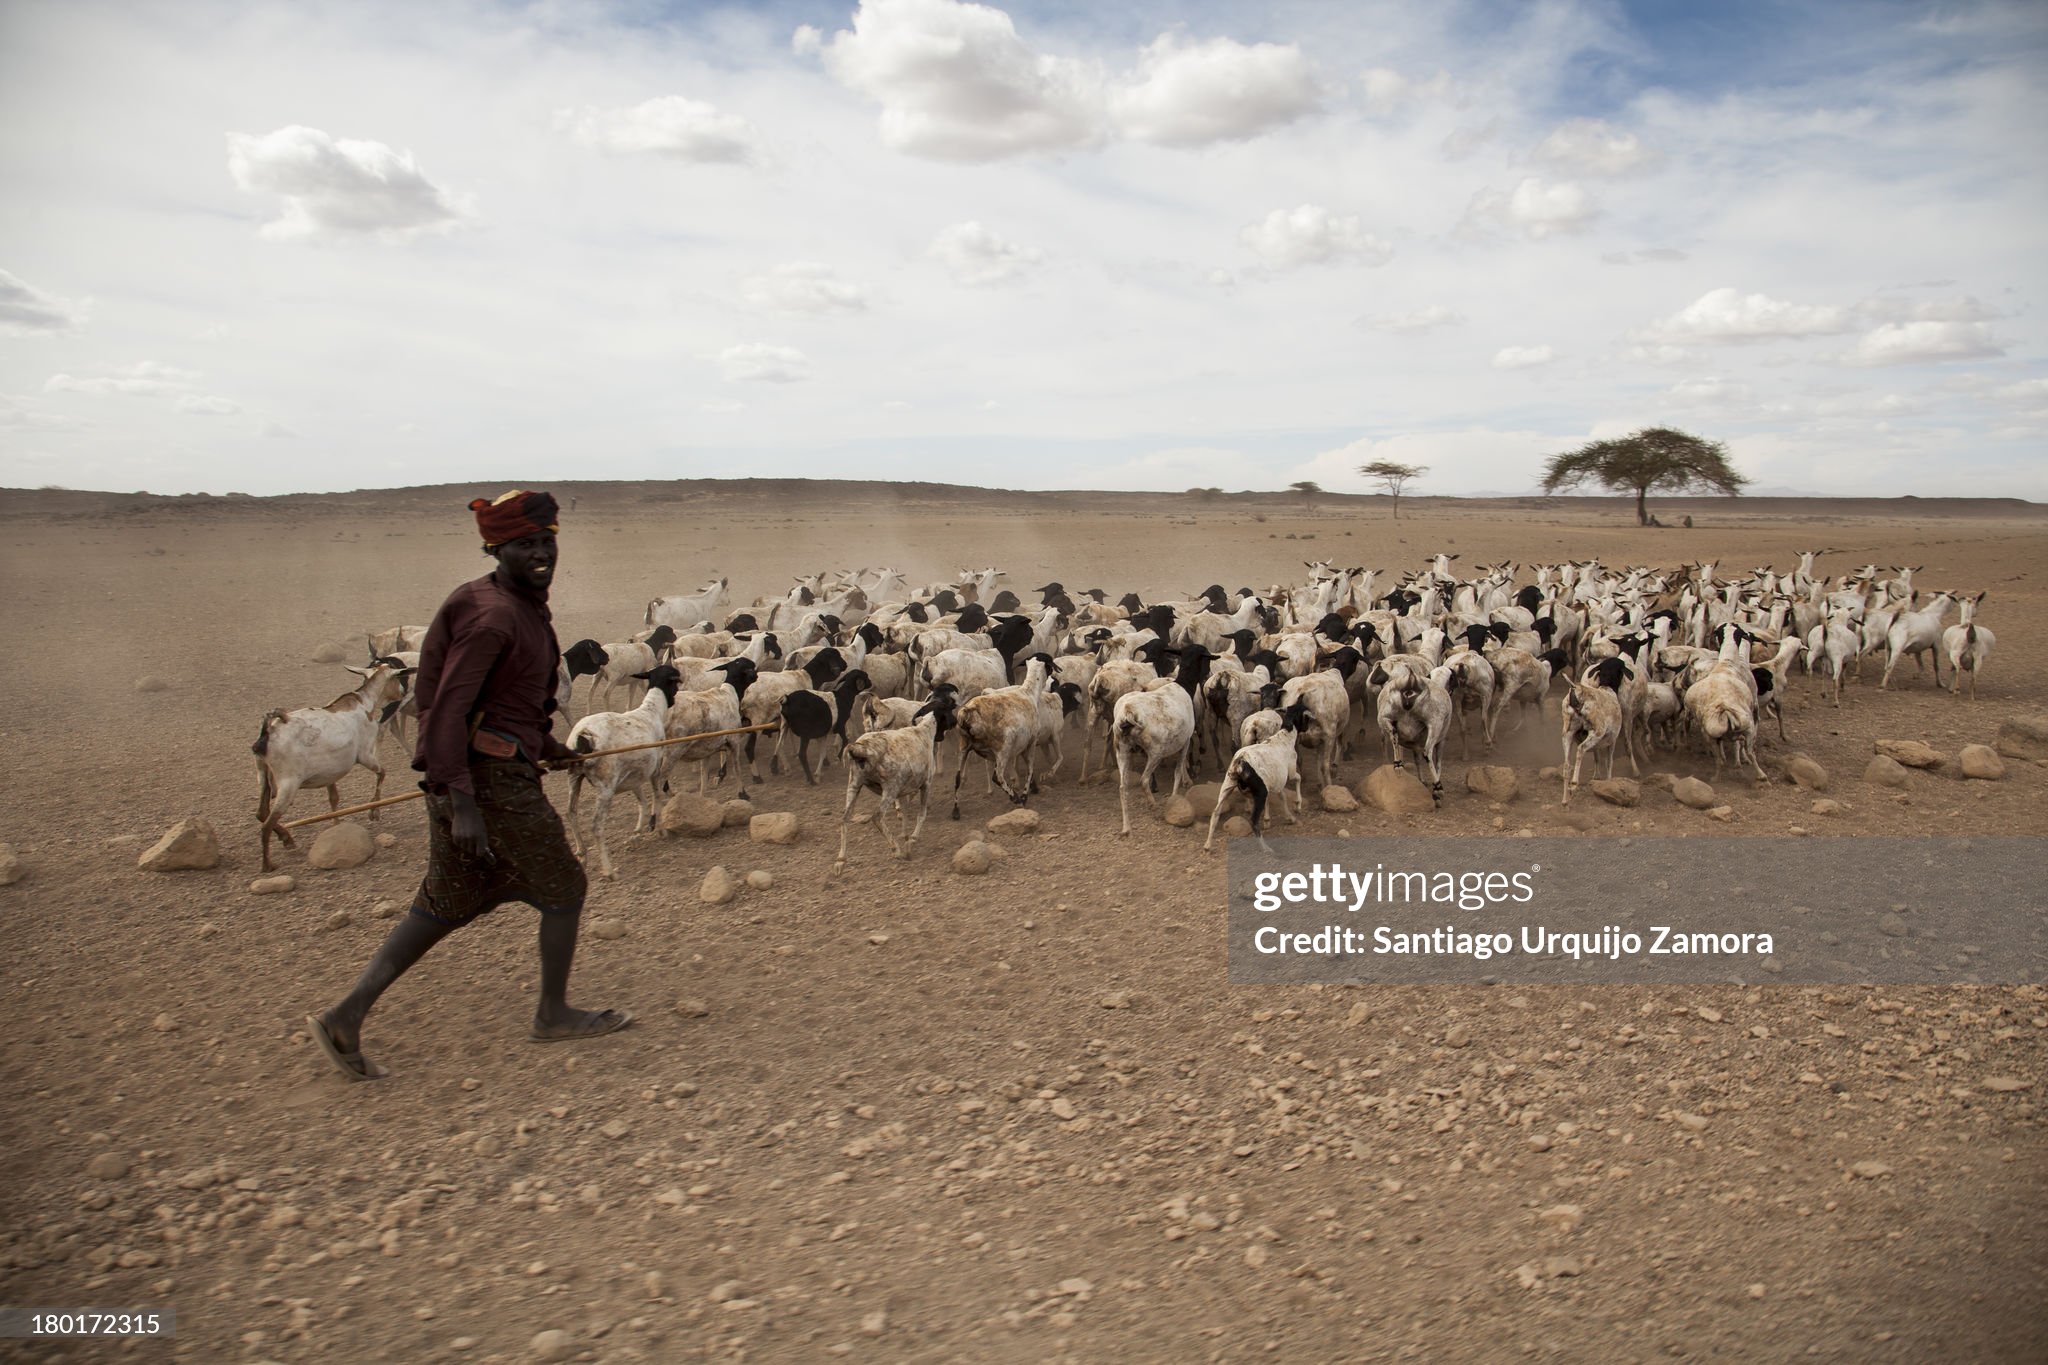 black-man-belonging-to-the-gabbra-tribe-directing-his-herd-of-goats-picture-id180172315